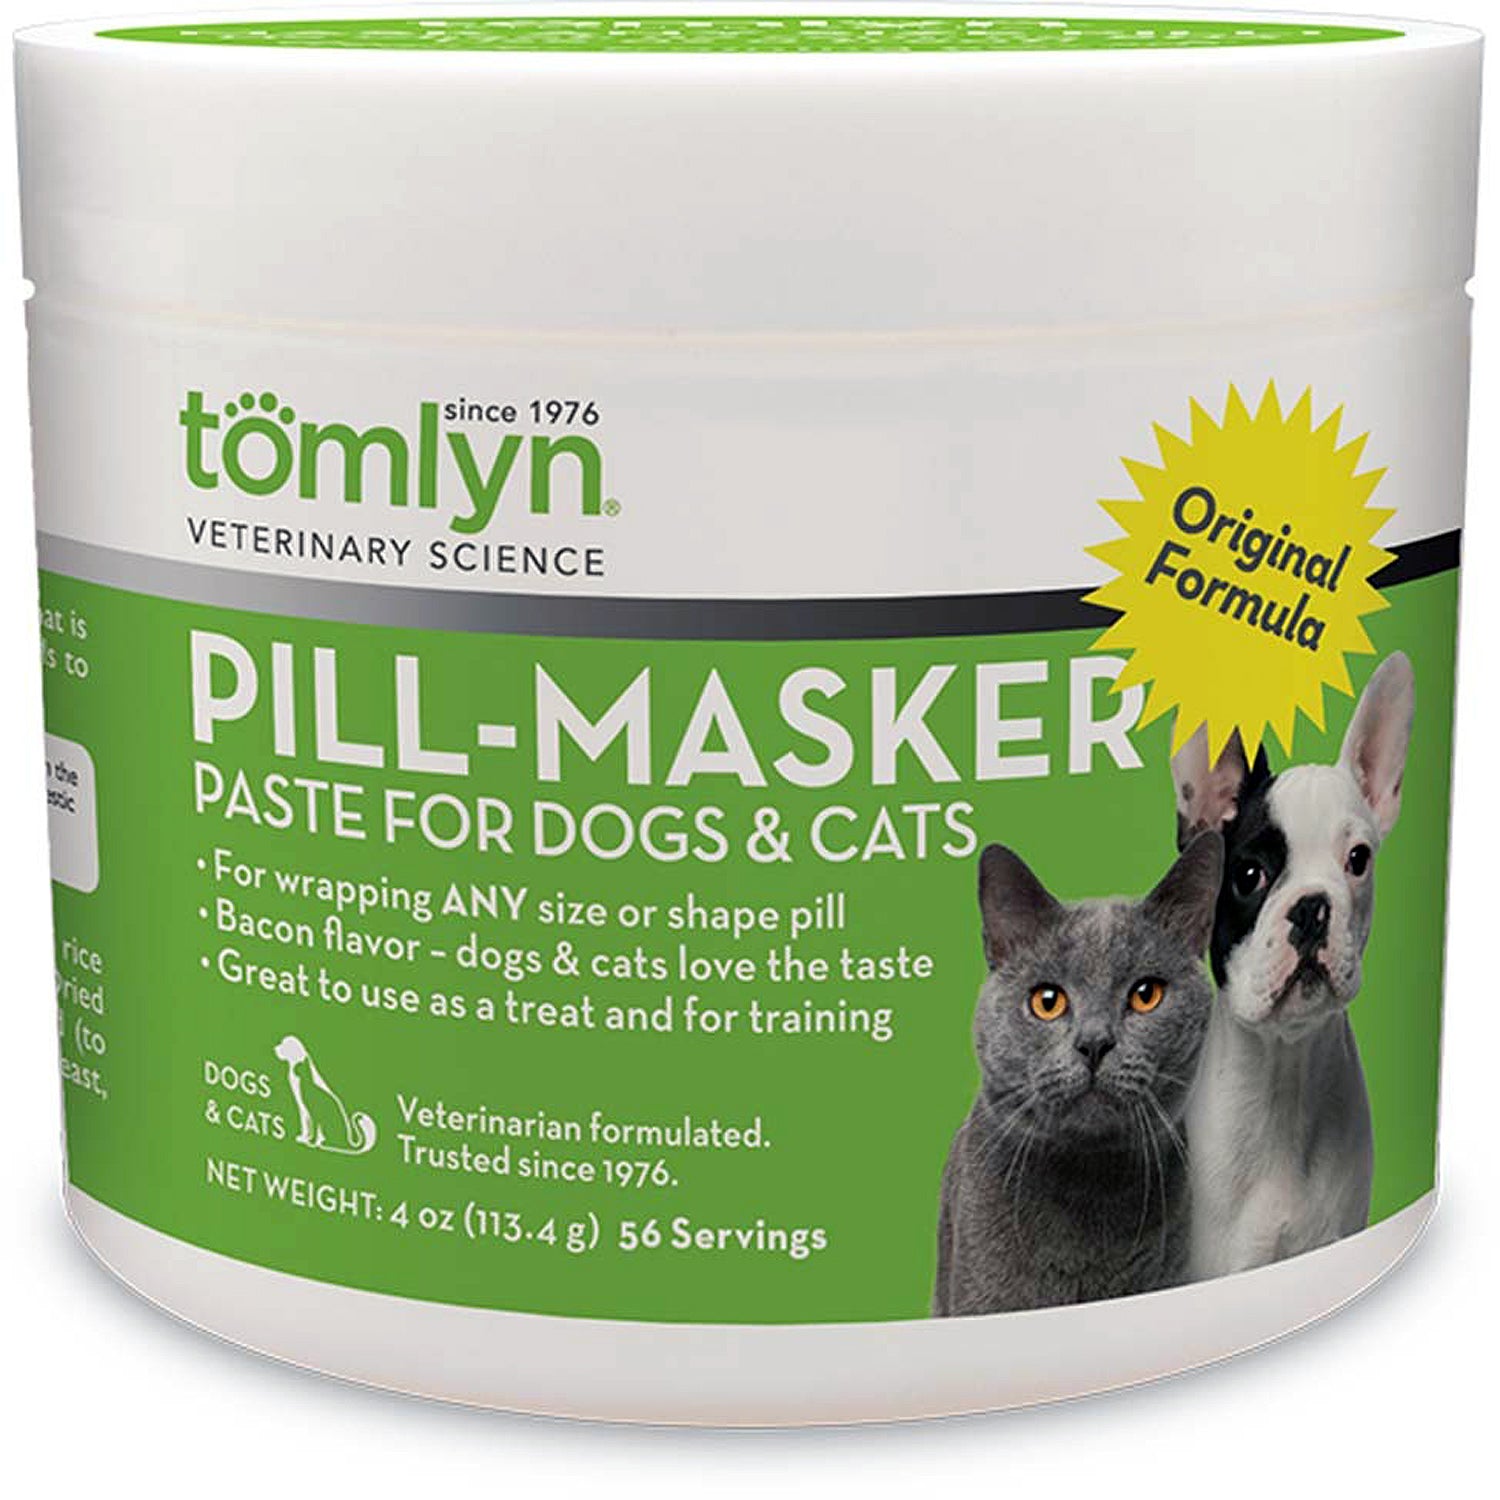 Tomlyn Pill-Masker for Dogs and Cats Original Formula 56 Count 4 oz